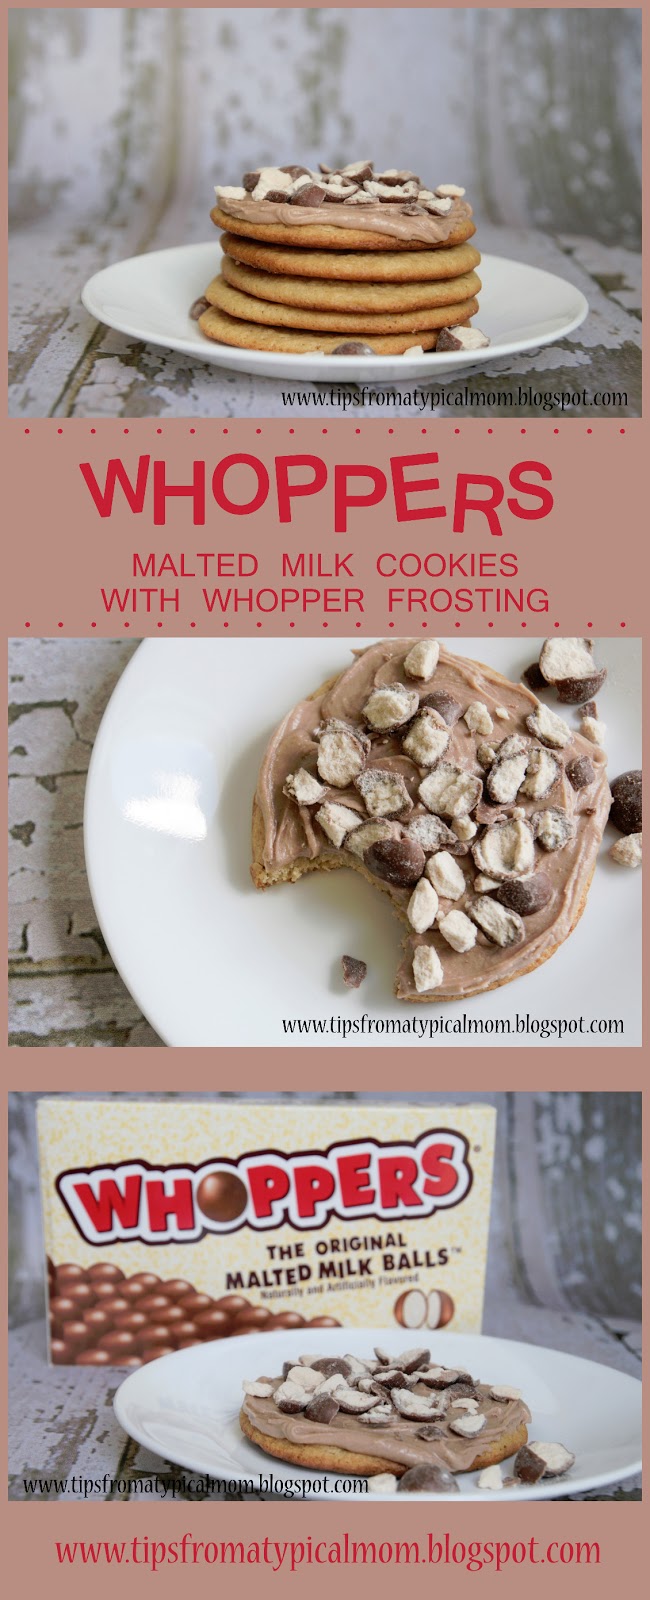 Malted Milk Cookies with Whoppers Frosting - Tips from a Typical Mom